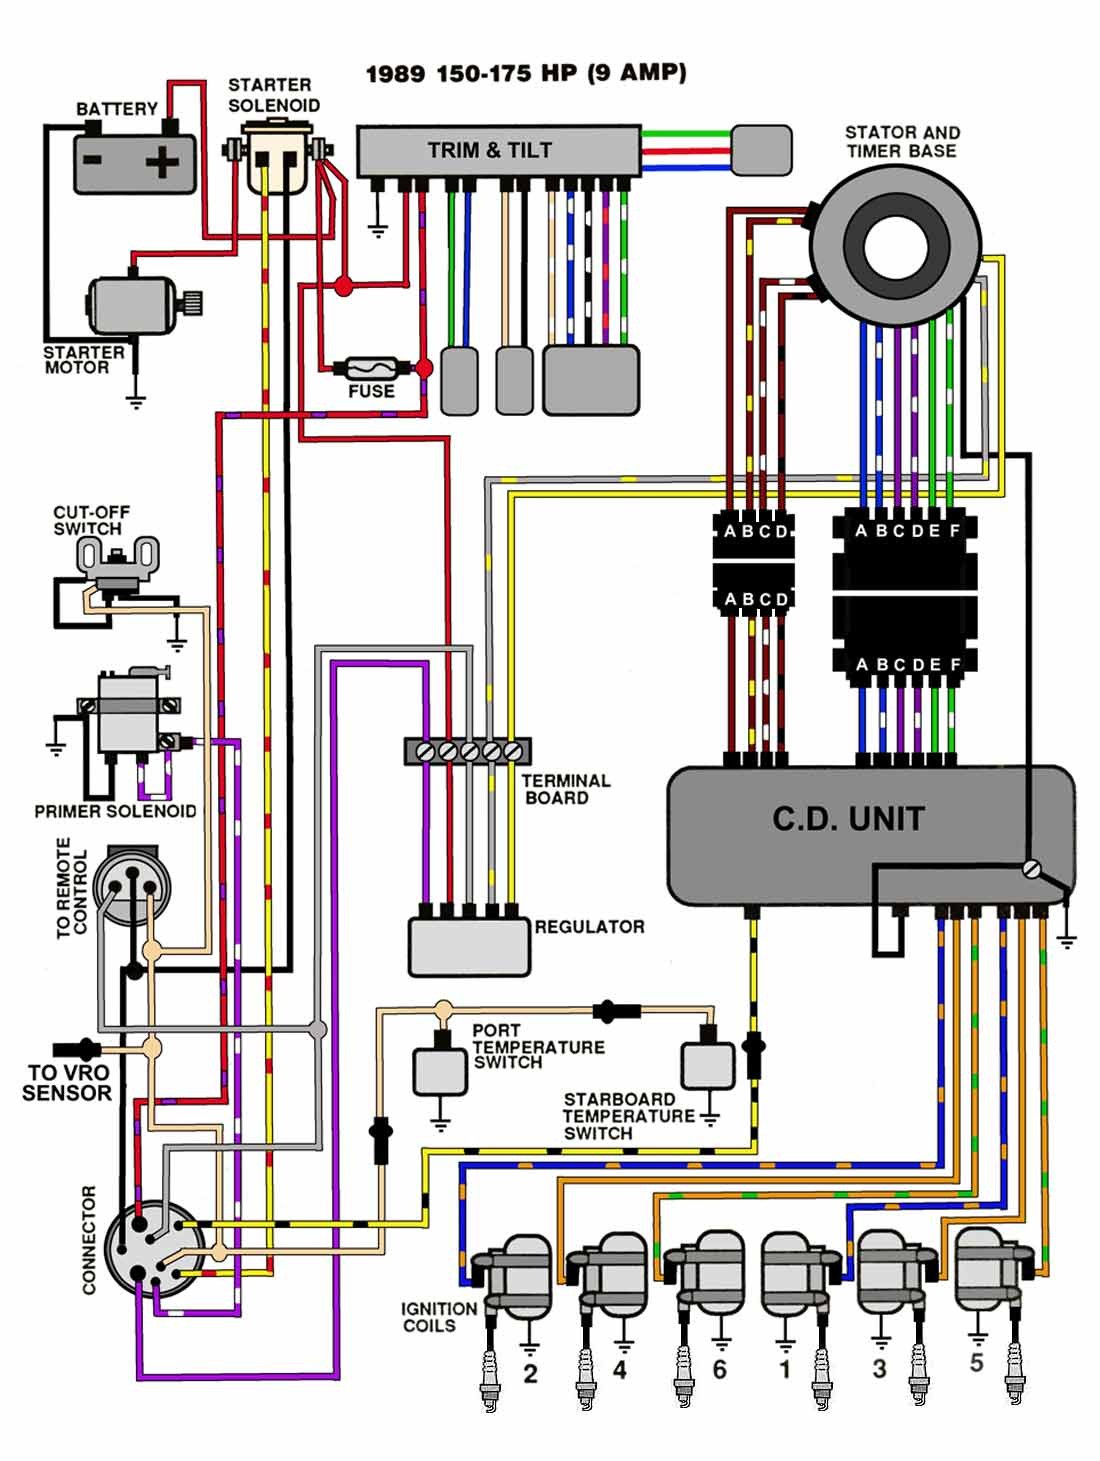 wiring diagram omc ignition switch and evinrude facybulka me solenoid switch wiring diagram diagram mastertech marine